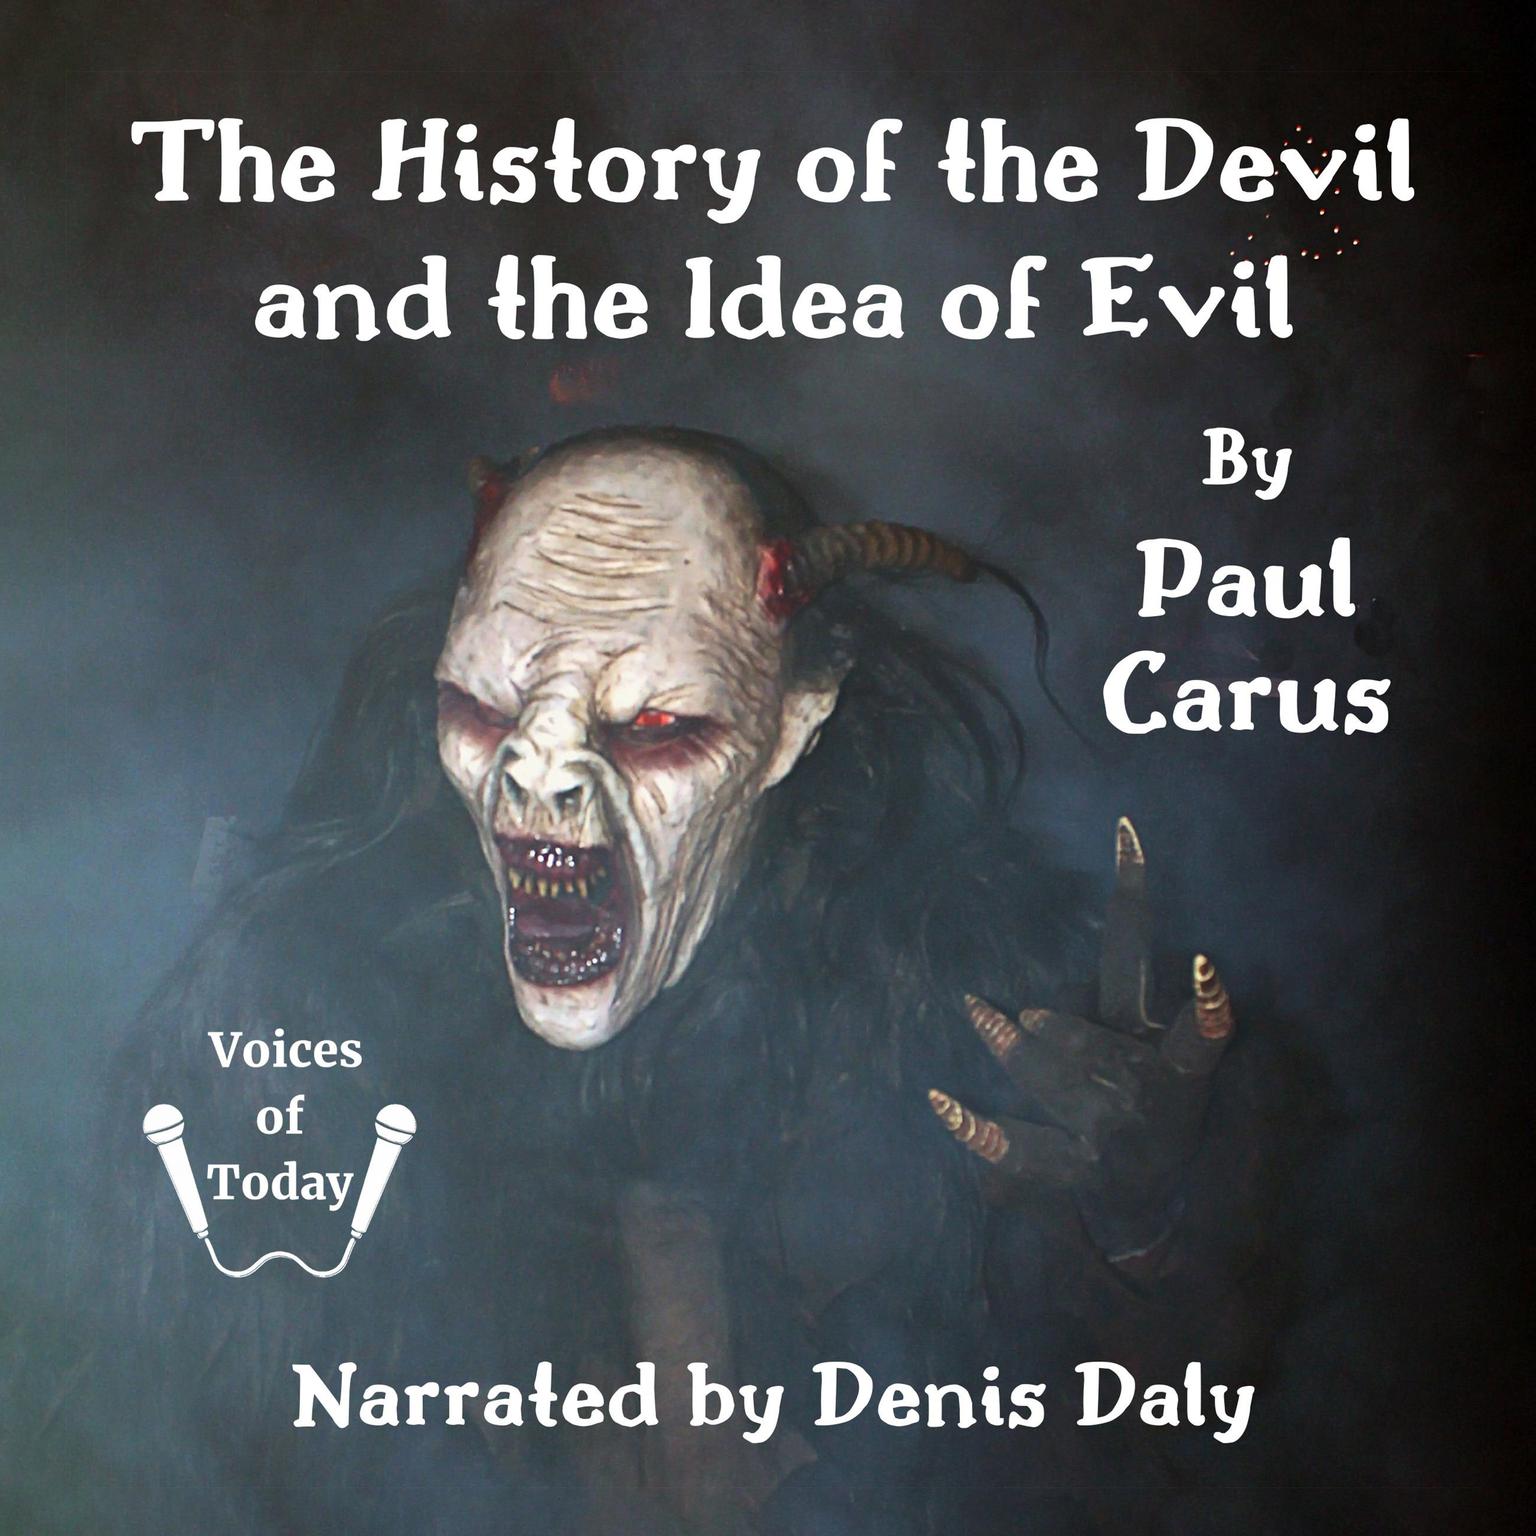 The History of the Devil and the Idea of Evil: From the Earliest Times to the Present Day Audiobook, by Paul Carus